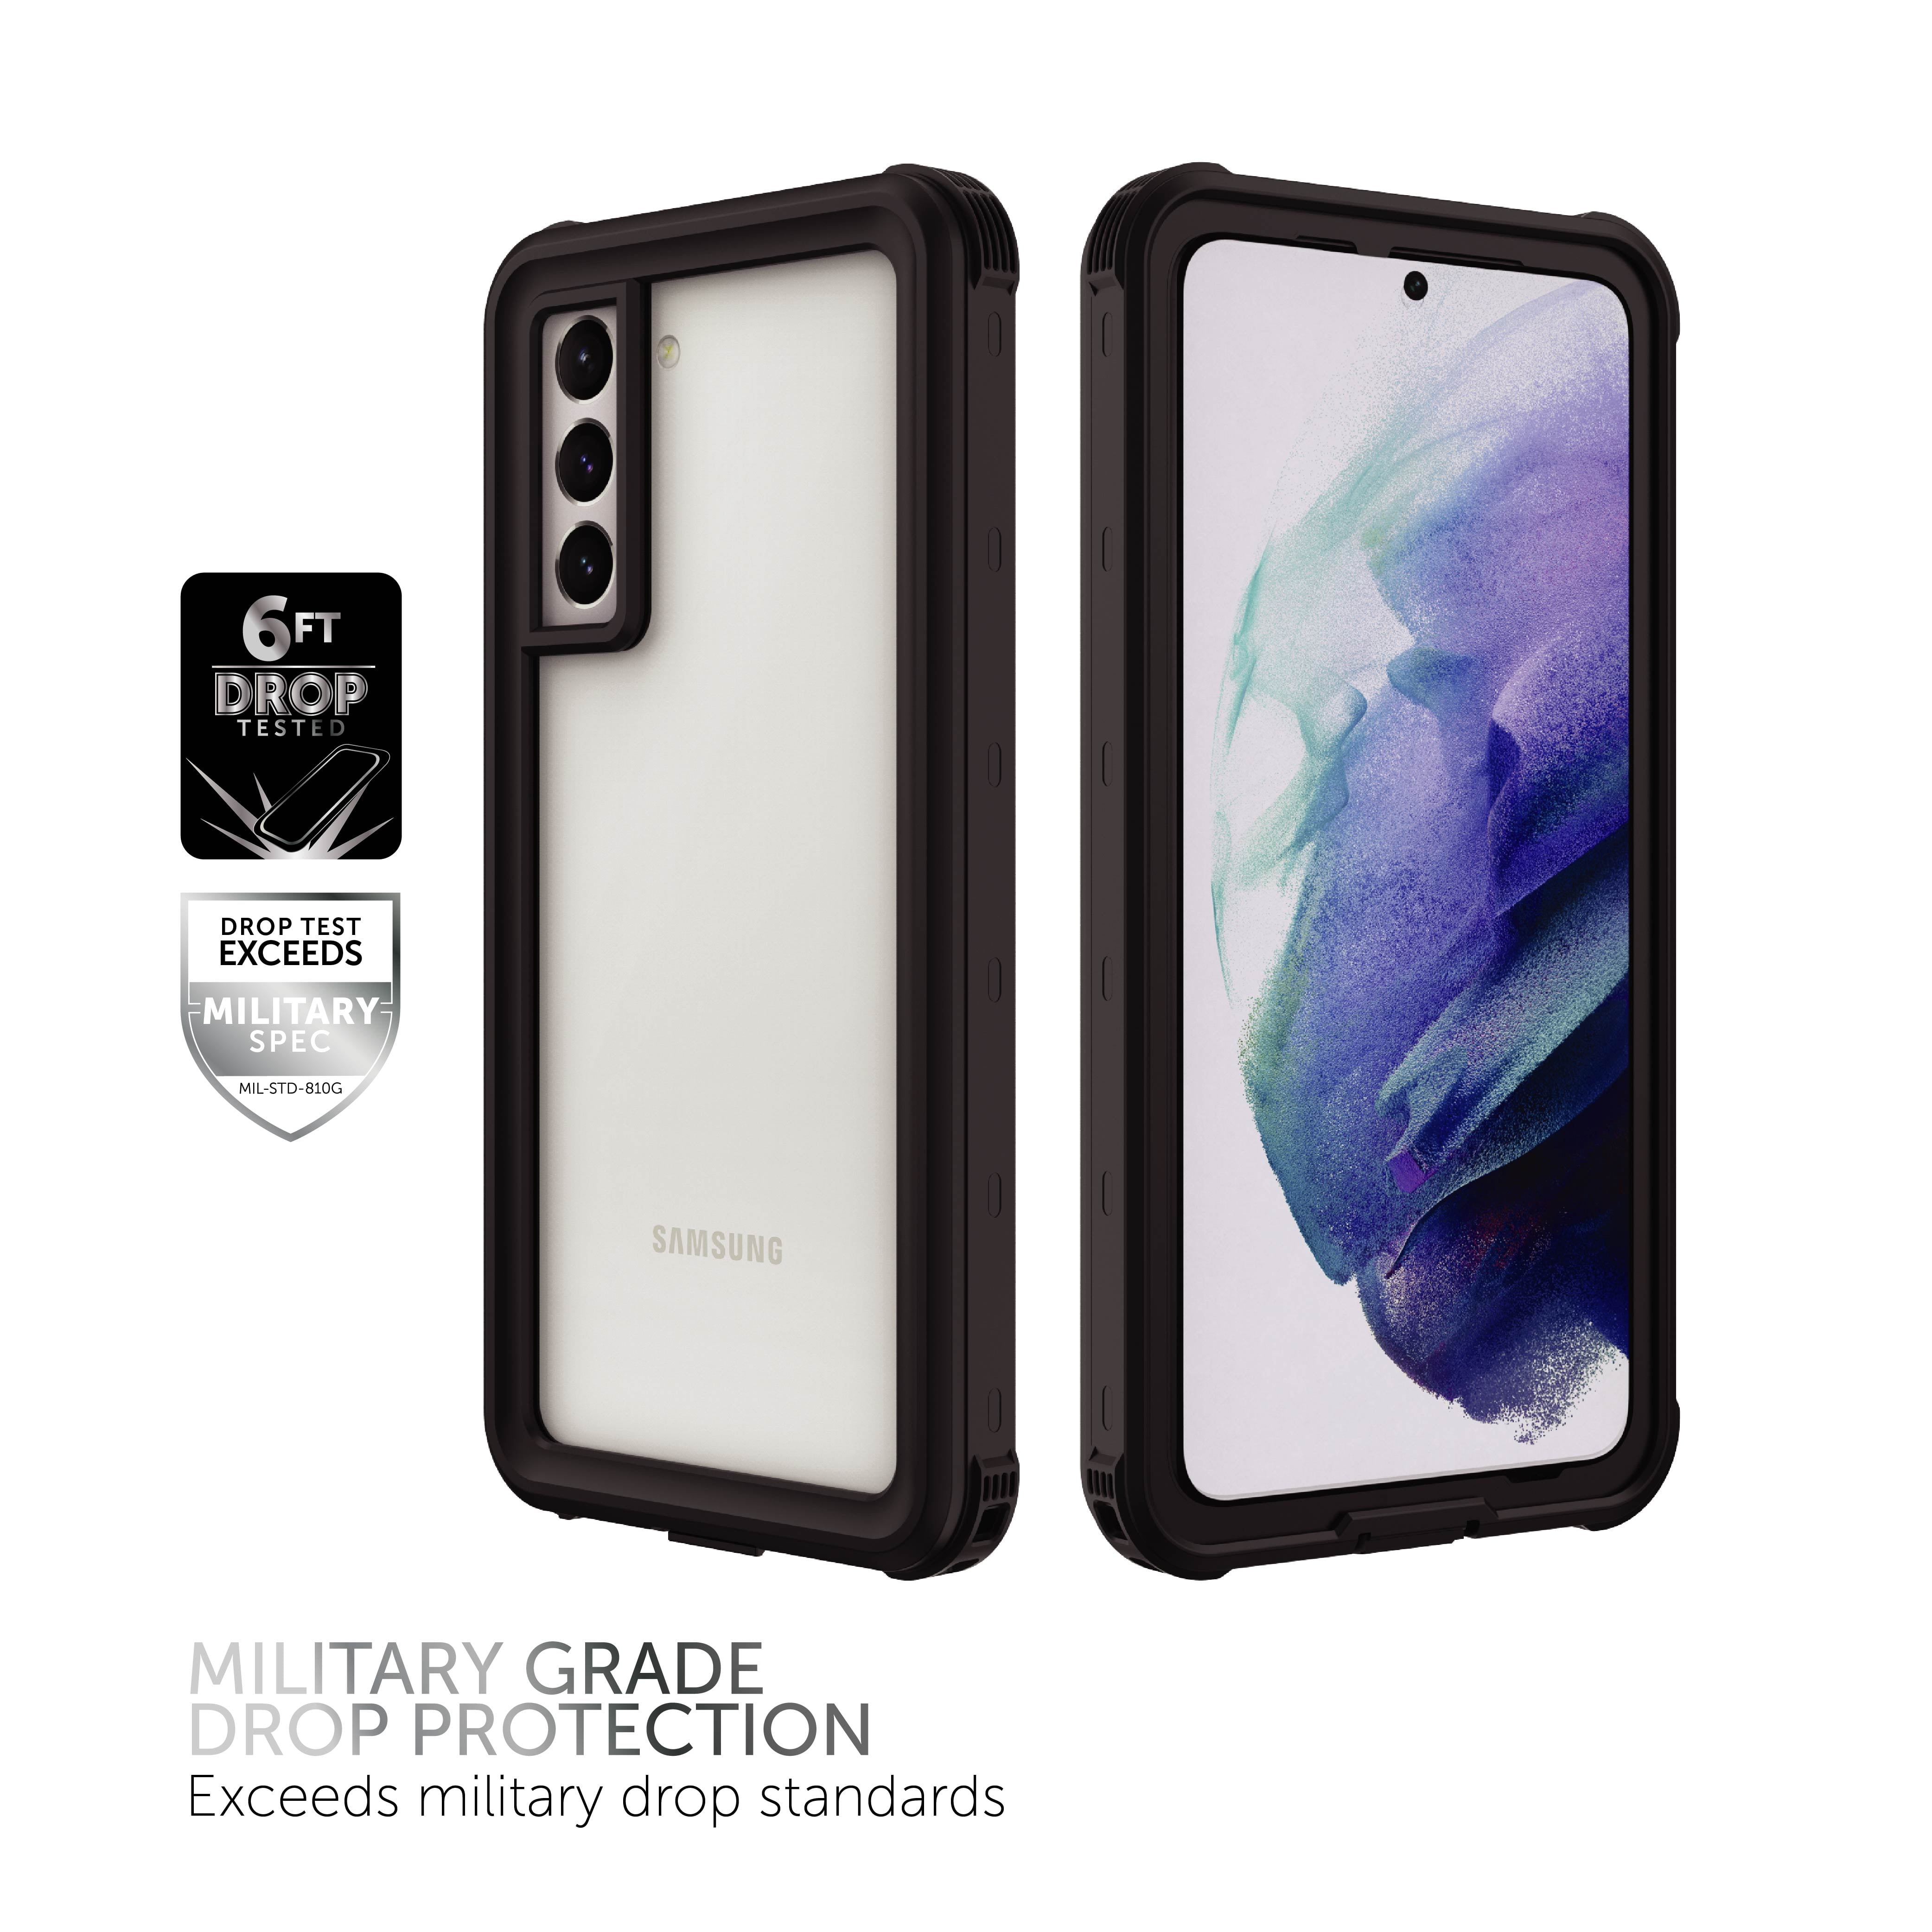 Lanhiem Samsung Galaxy S21 Case, IP68 Waterproof Dustproof Shockproof Case  with Built-in Screen Protector, Full Body Heavy Duty Protective Clear Cover